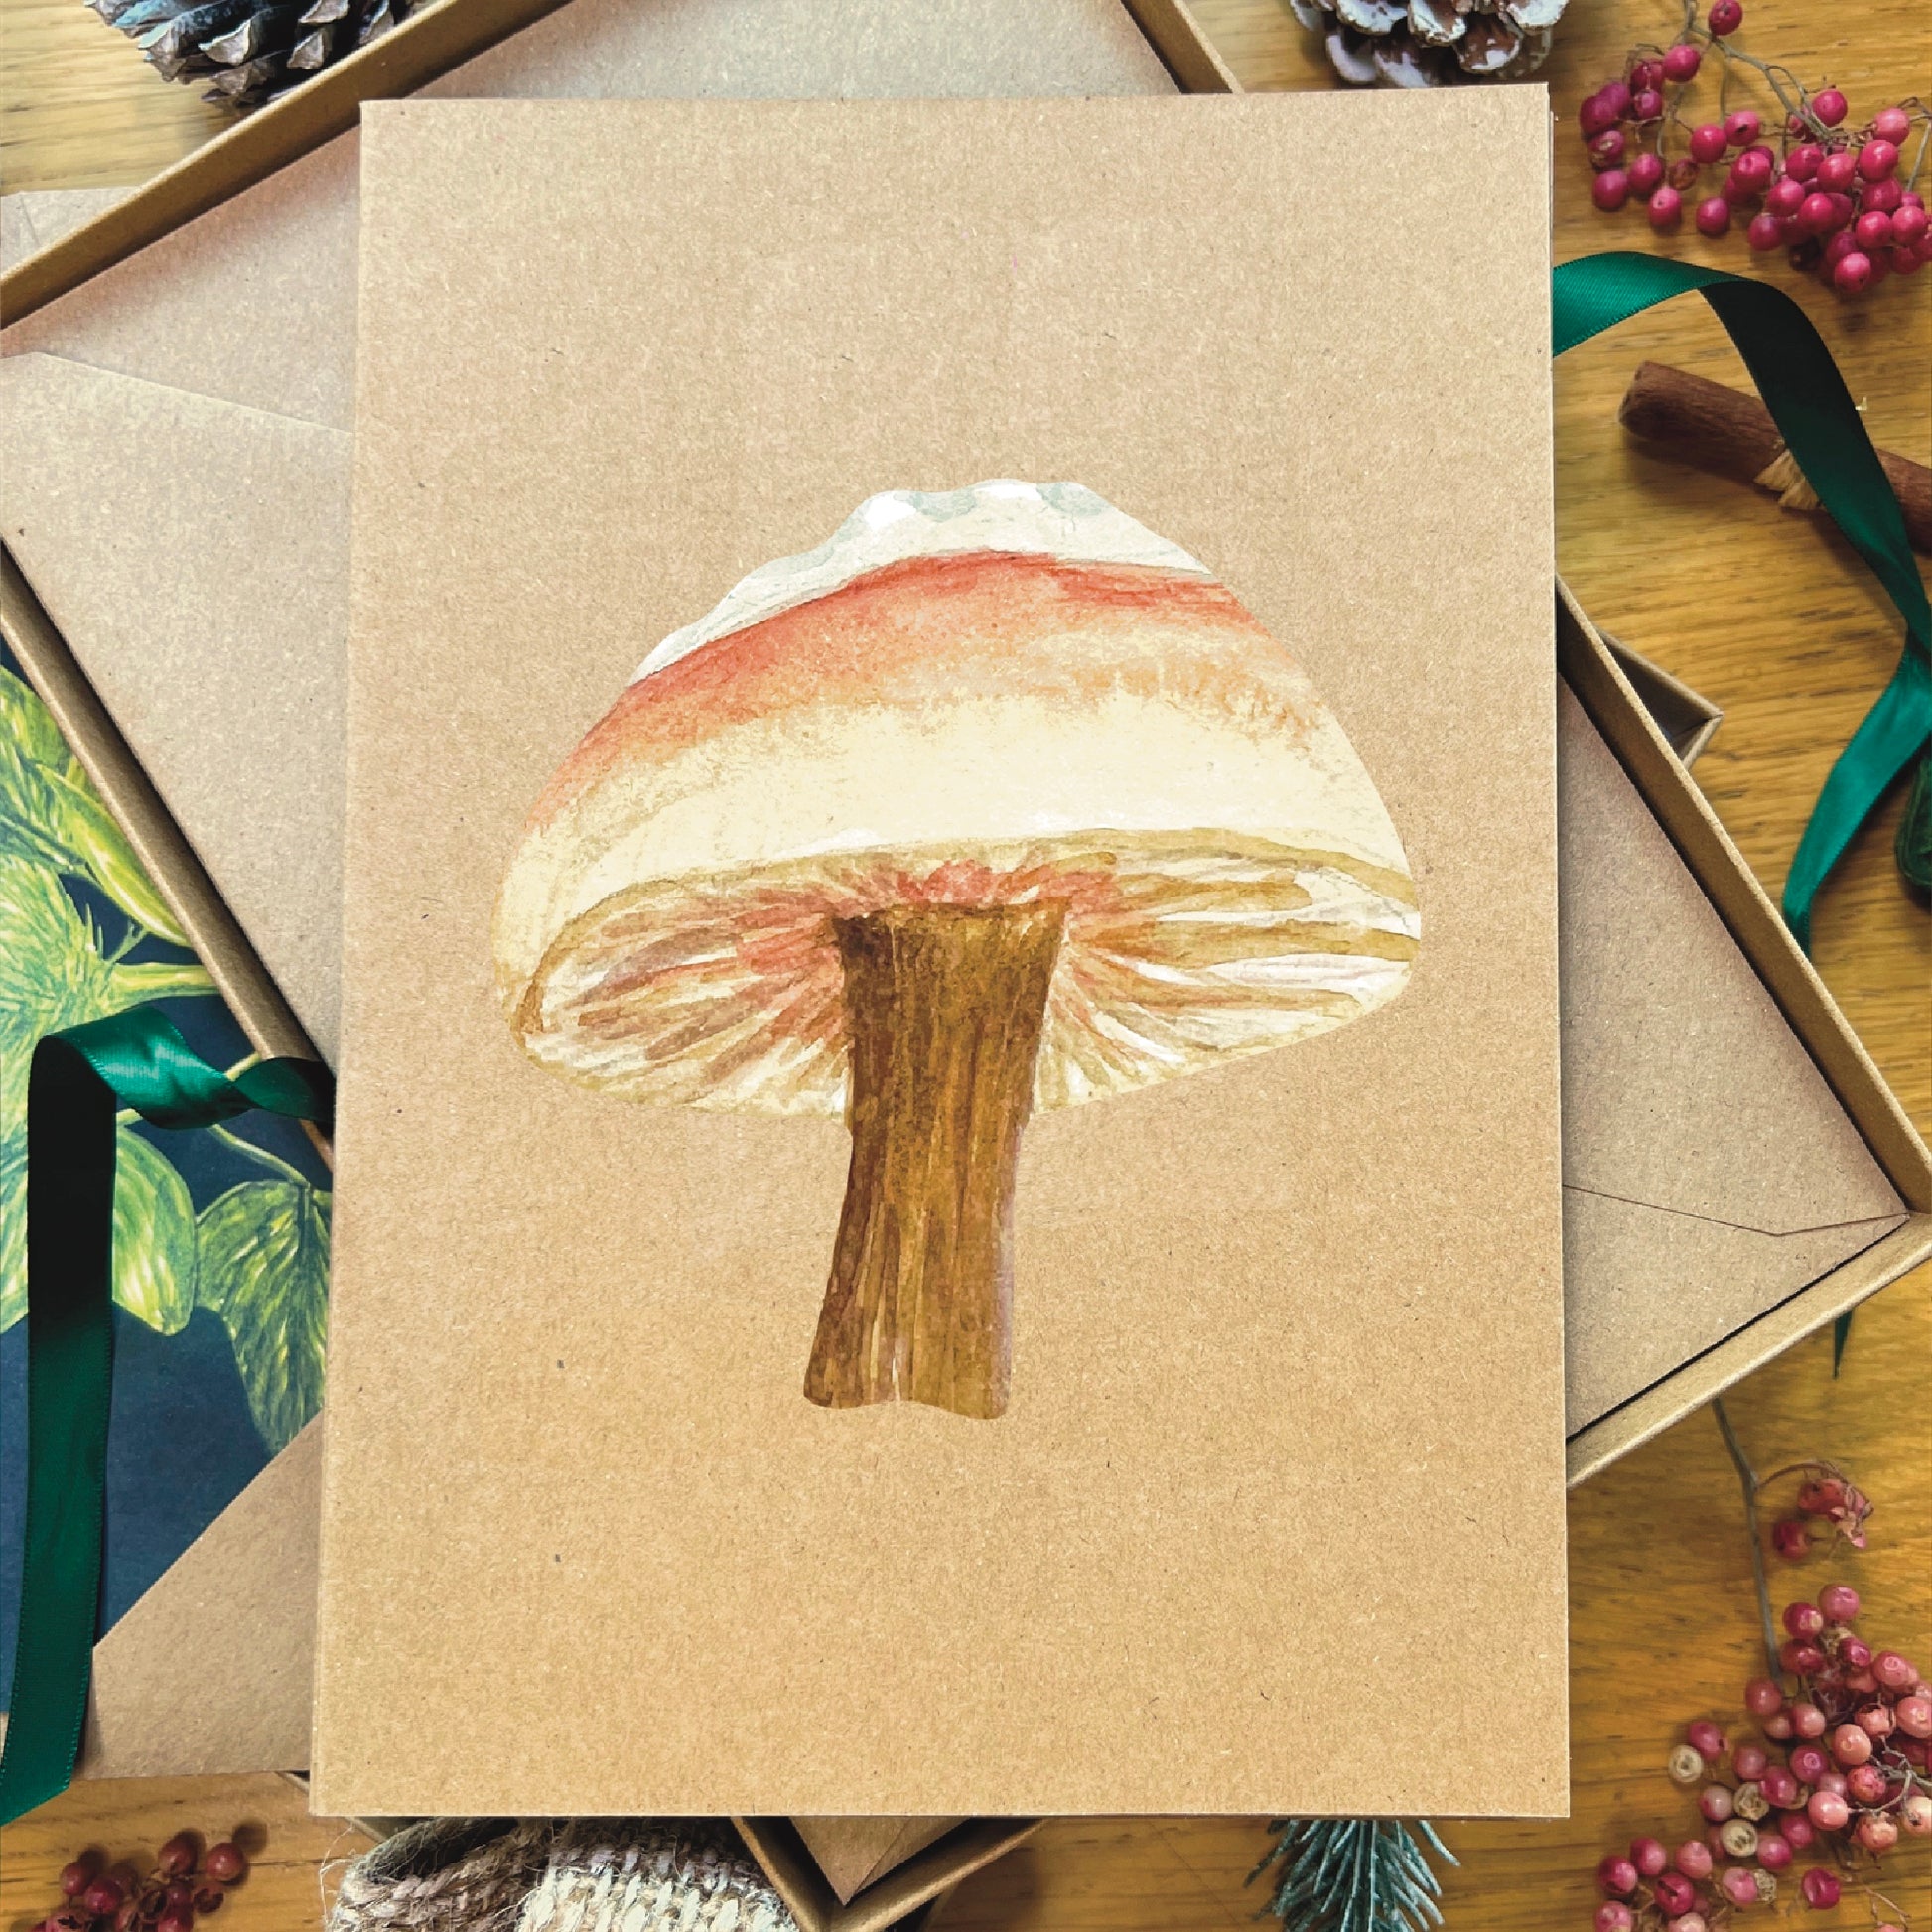 Snow topped slimy Waxcap mushroom illustrated in watercolour attached to Manila recycled greetings card on a wooden desk